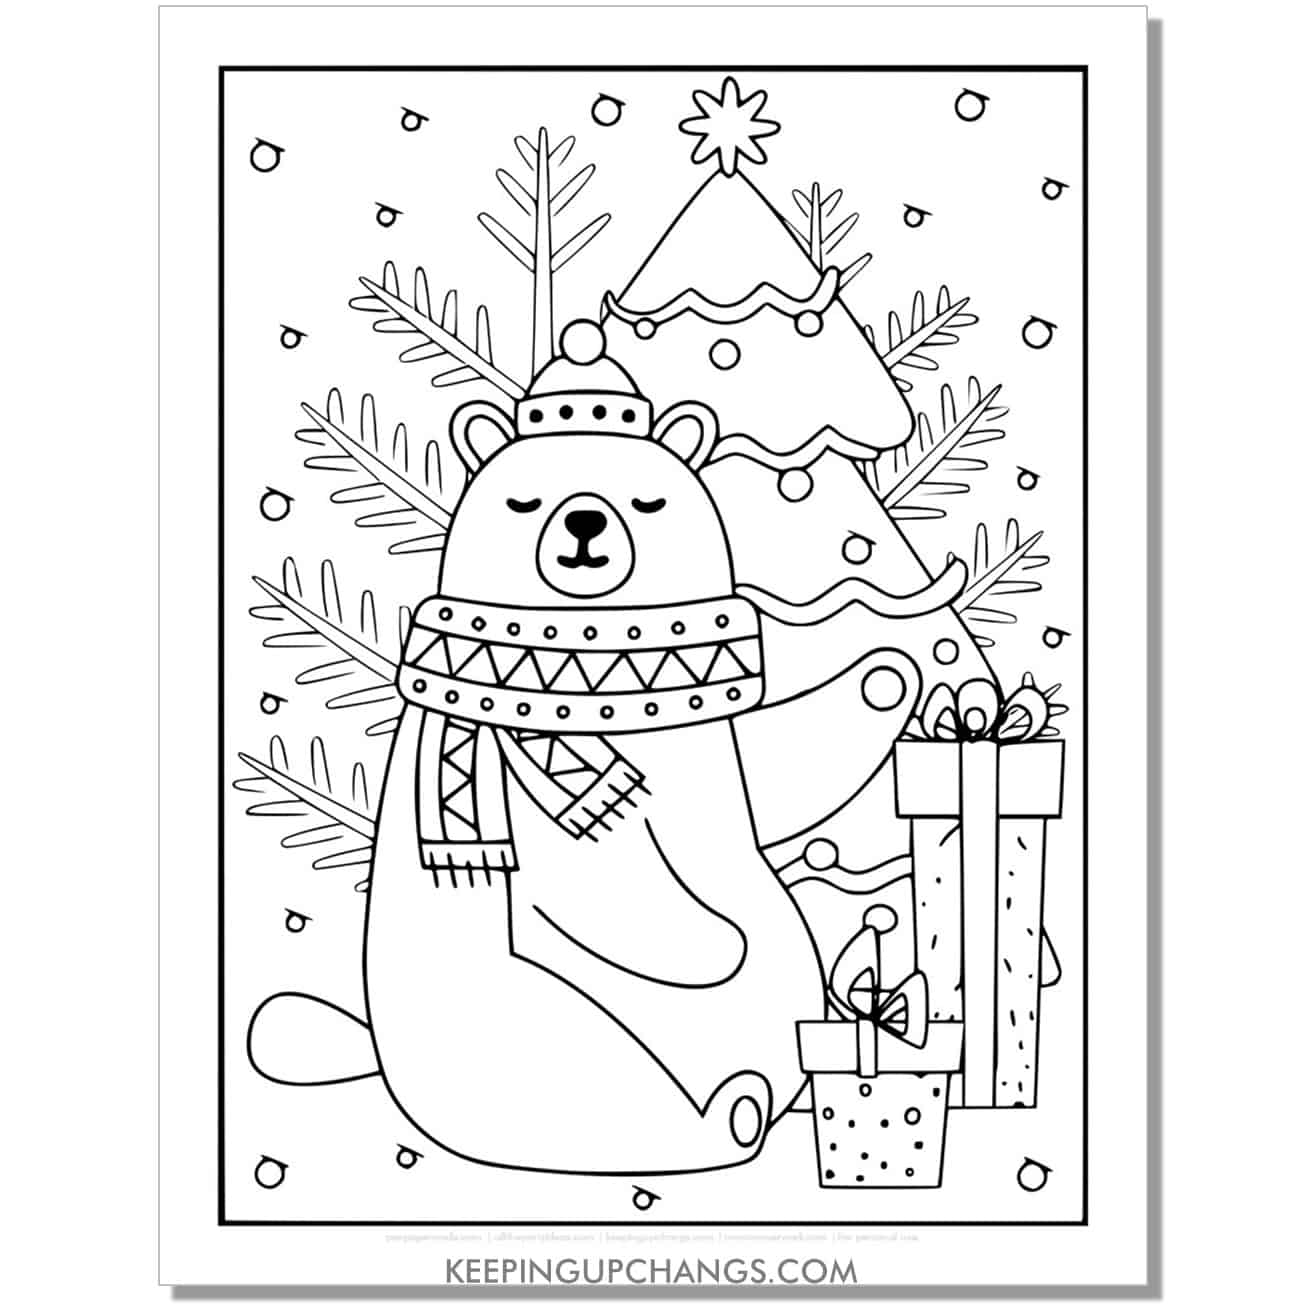 free bear sitting by decorated tree and presents full size christmas animal coloring page.